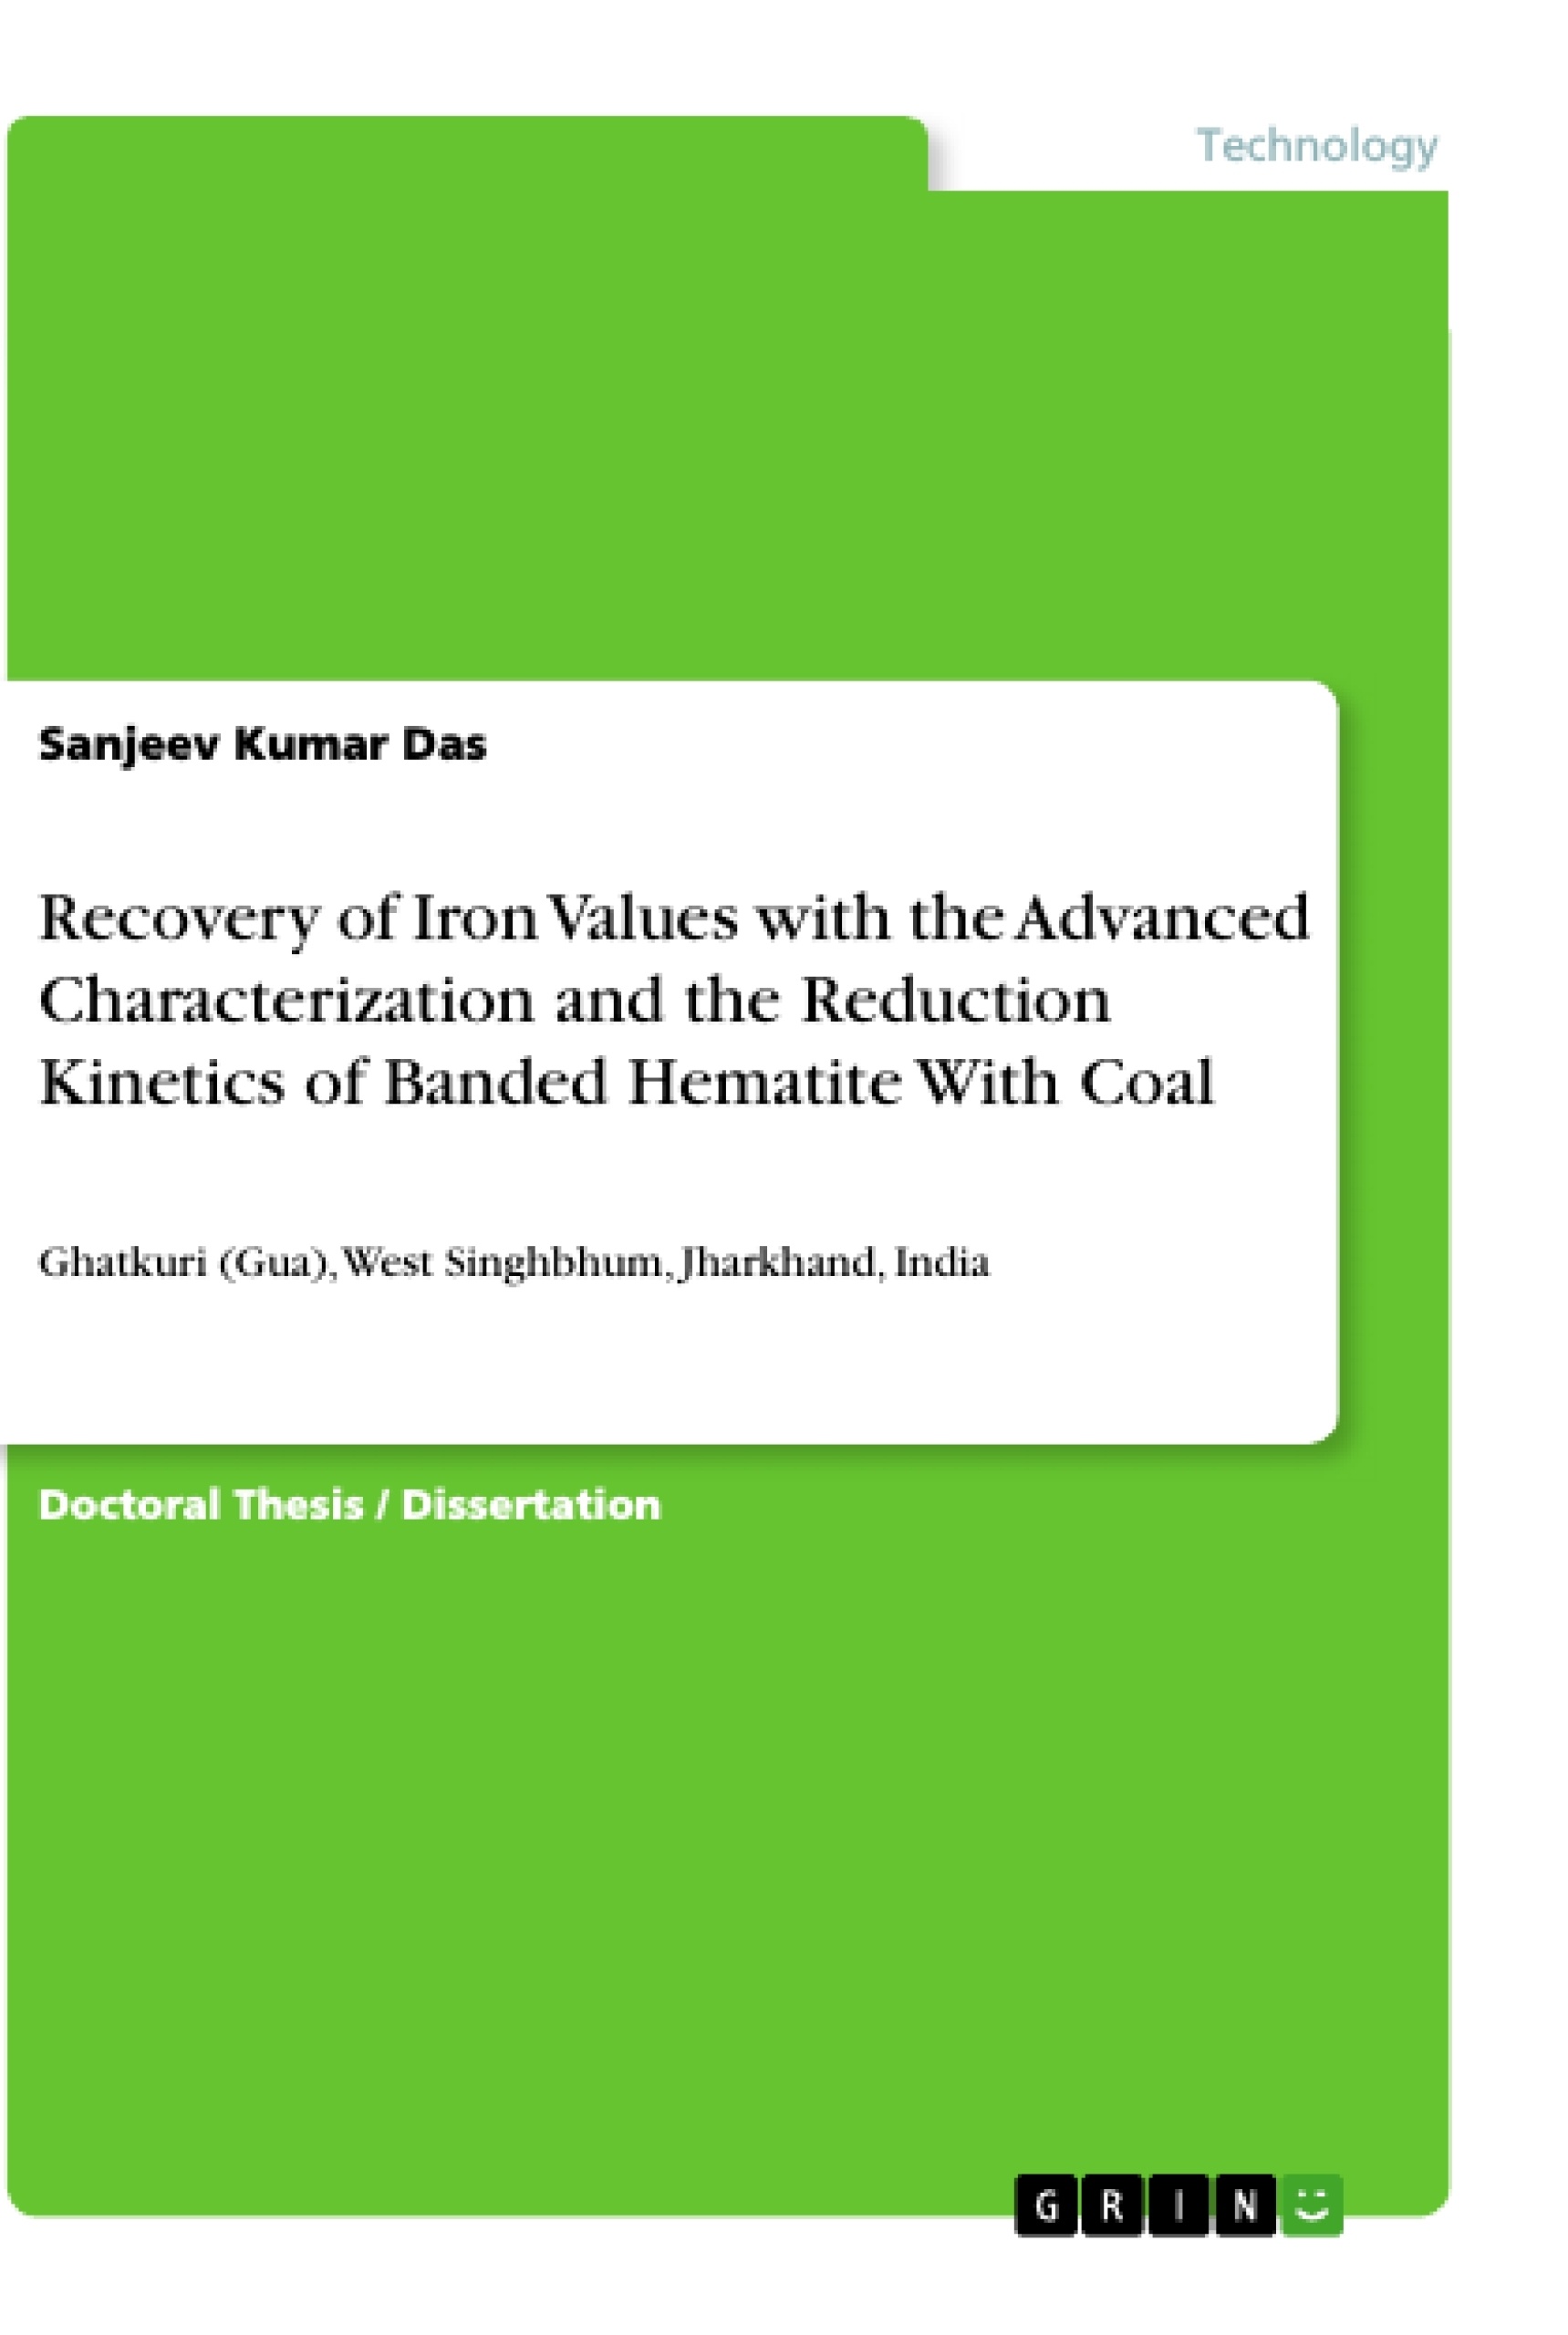 Título: Recovery of Iron Values with the Advanced Characterization and the Reduction Kinetics of Banded Hematite With Coal